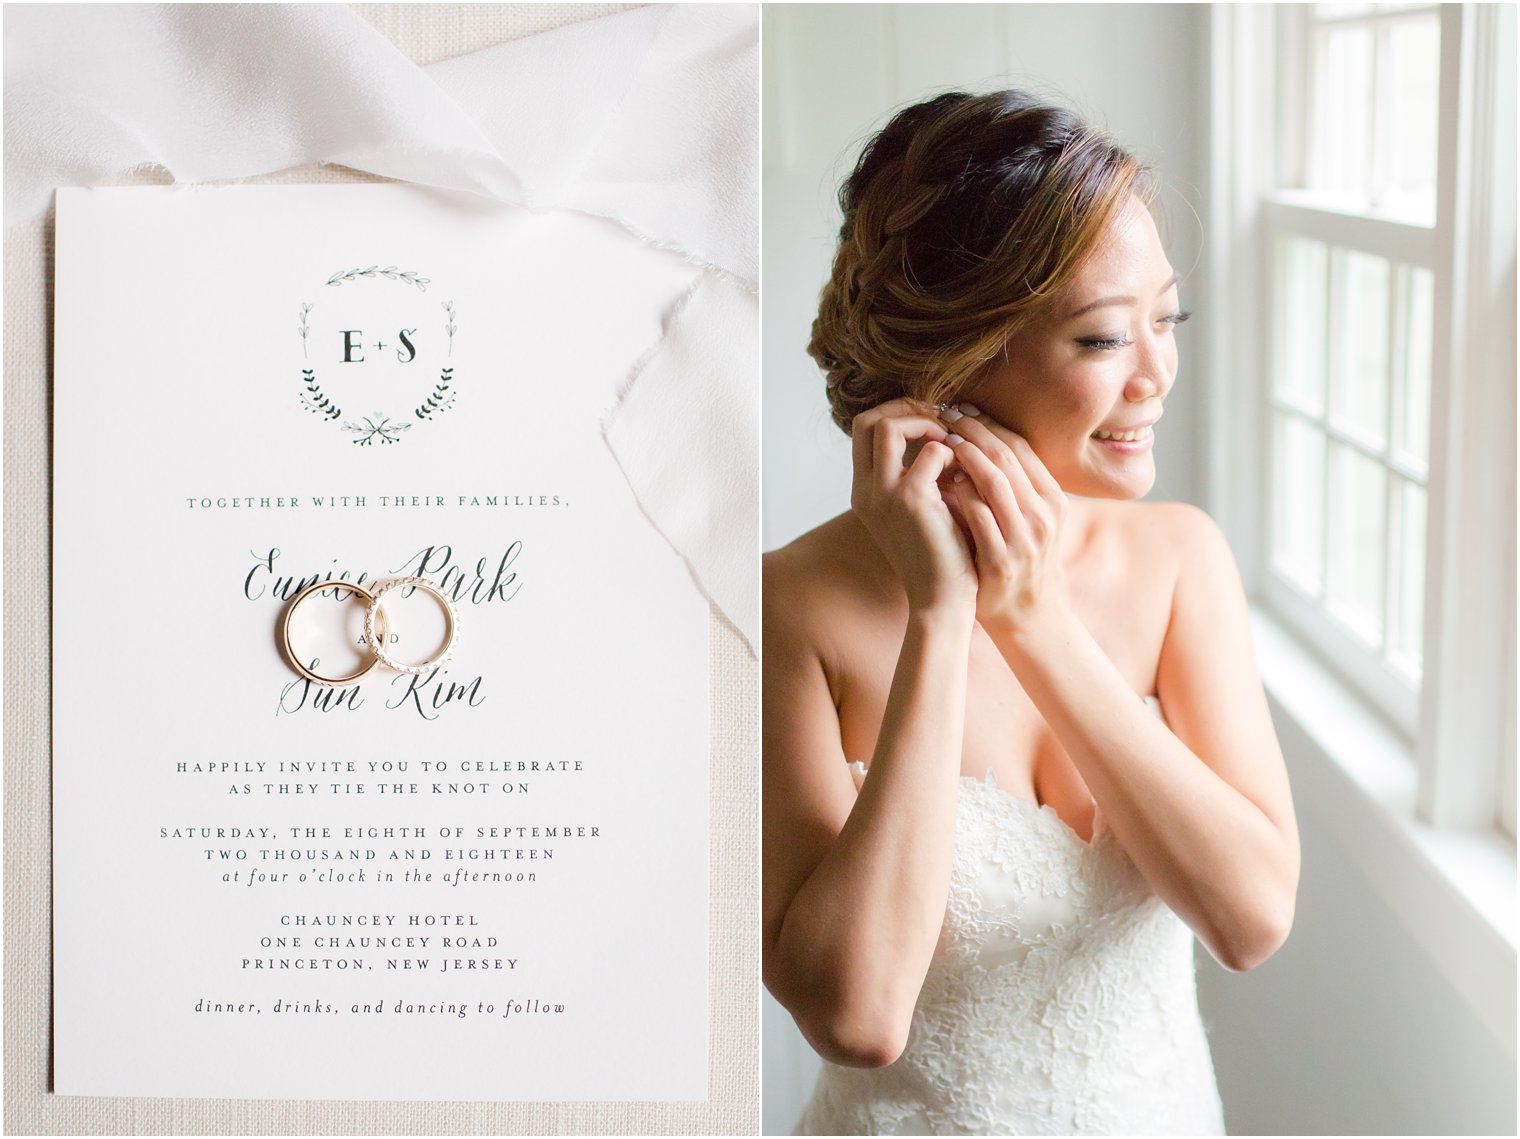 Elegant wedding invitation for Chauncey Hotel wedding by Minted and bride getting ready for wedding day photographed by Idalia Photography